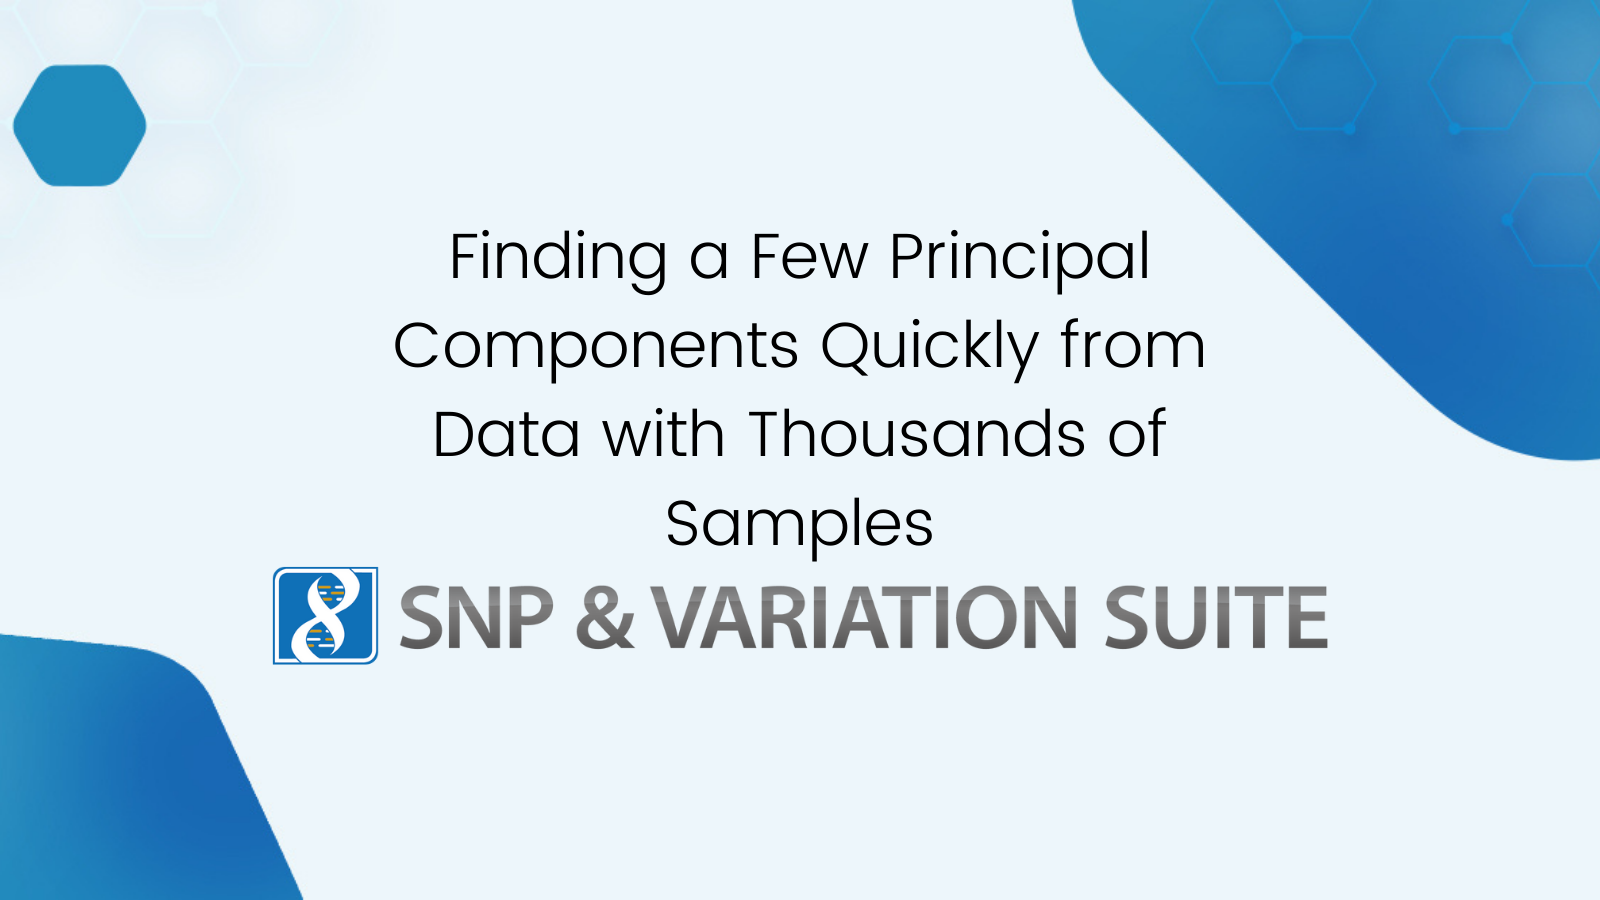 Finding a Few Principal Components Quickly from Data with Thousands of Samples